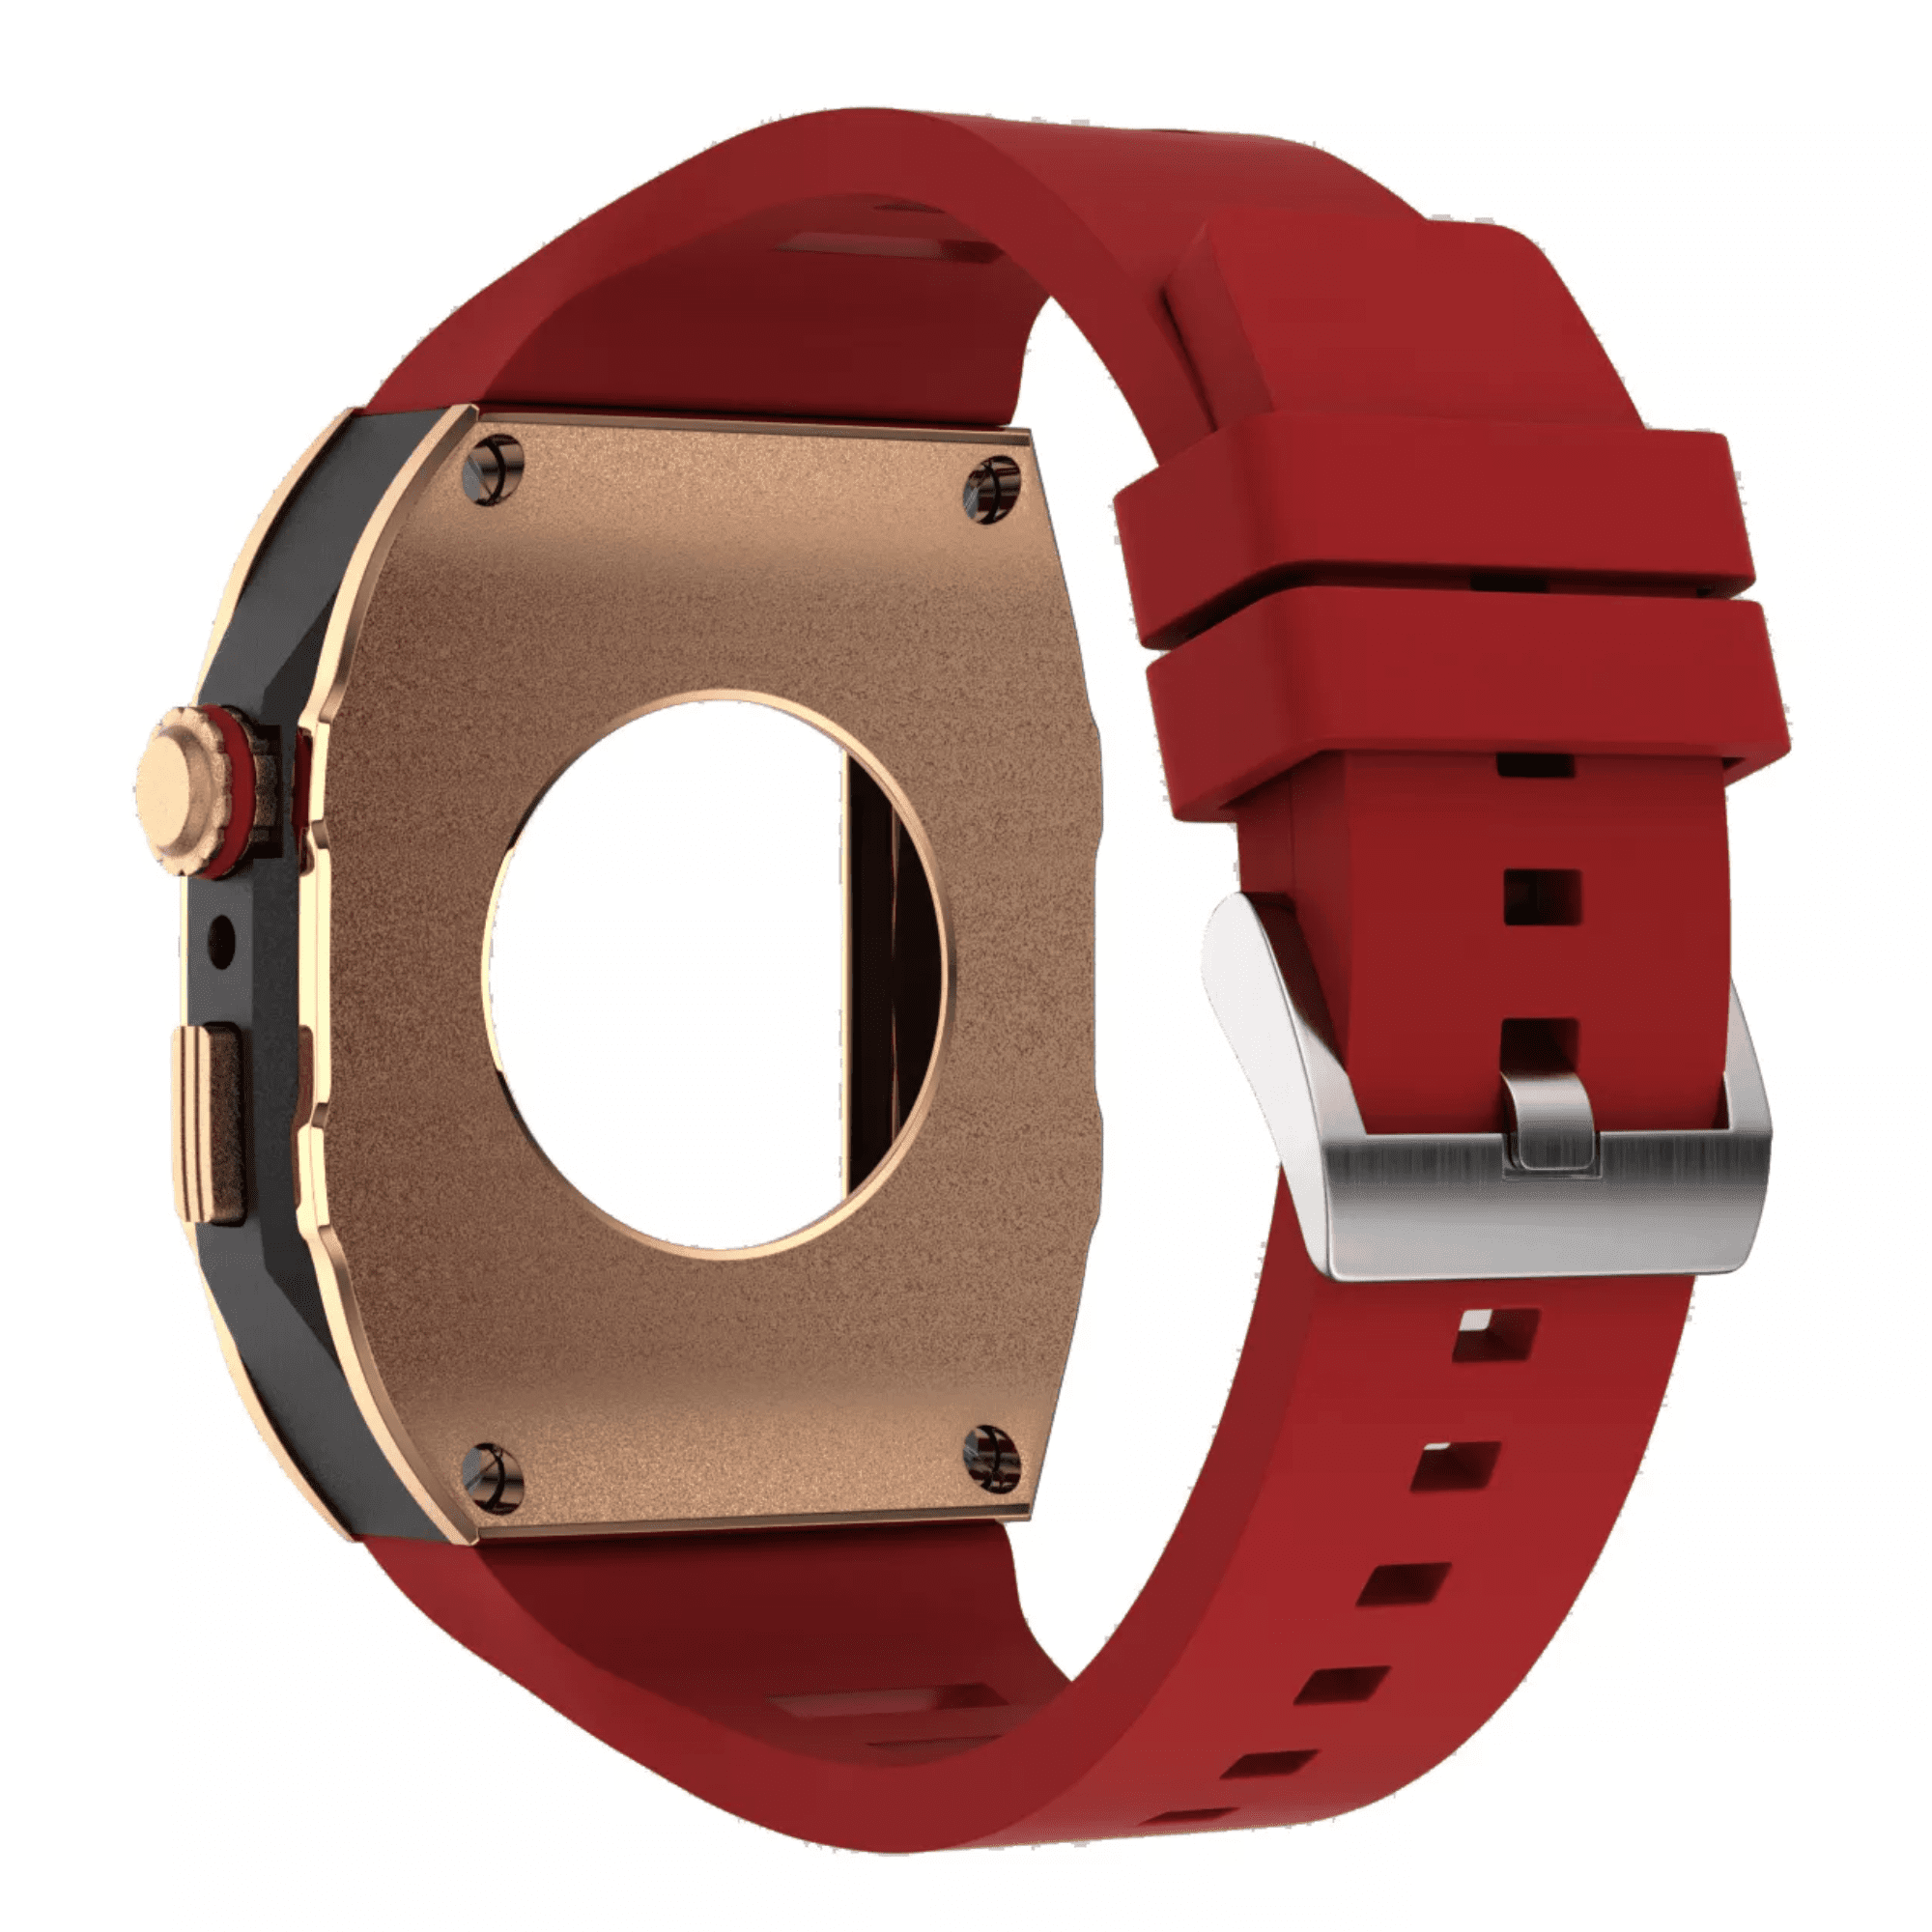 Golden Concept Style Case and Strap for Apple Watch | Luxury & Sporty Apple Watch Case & Fashion Accessory | Mod Kit Replacement for Apple Watch Series SE/3/4/5/67/8 45 mm| Rosè Gold Case - Red Band mod kits india dream watches apple watch